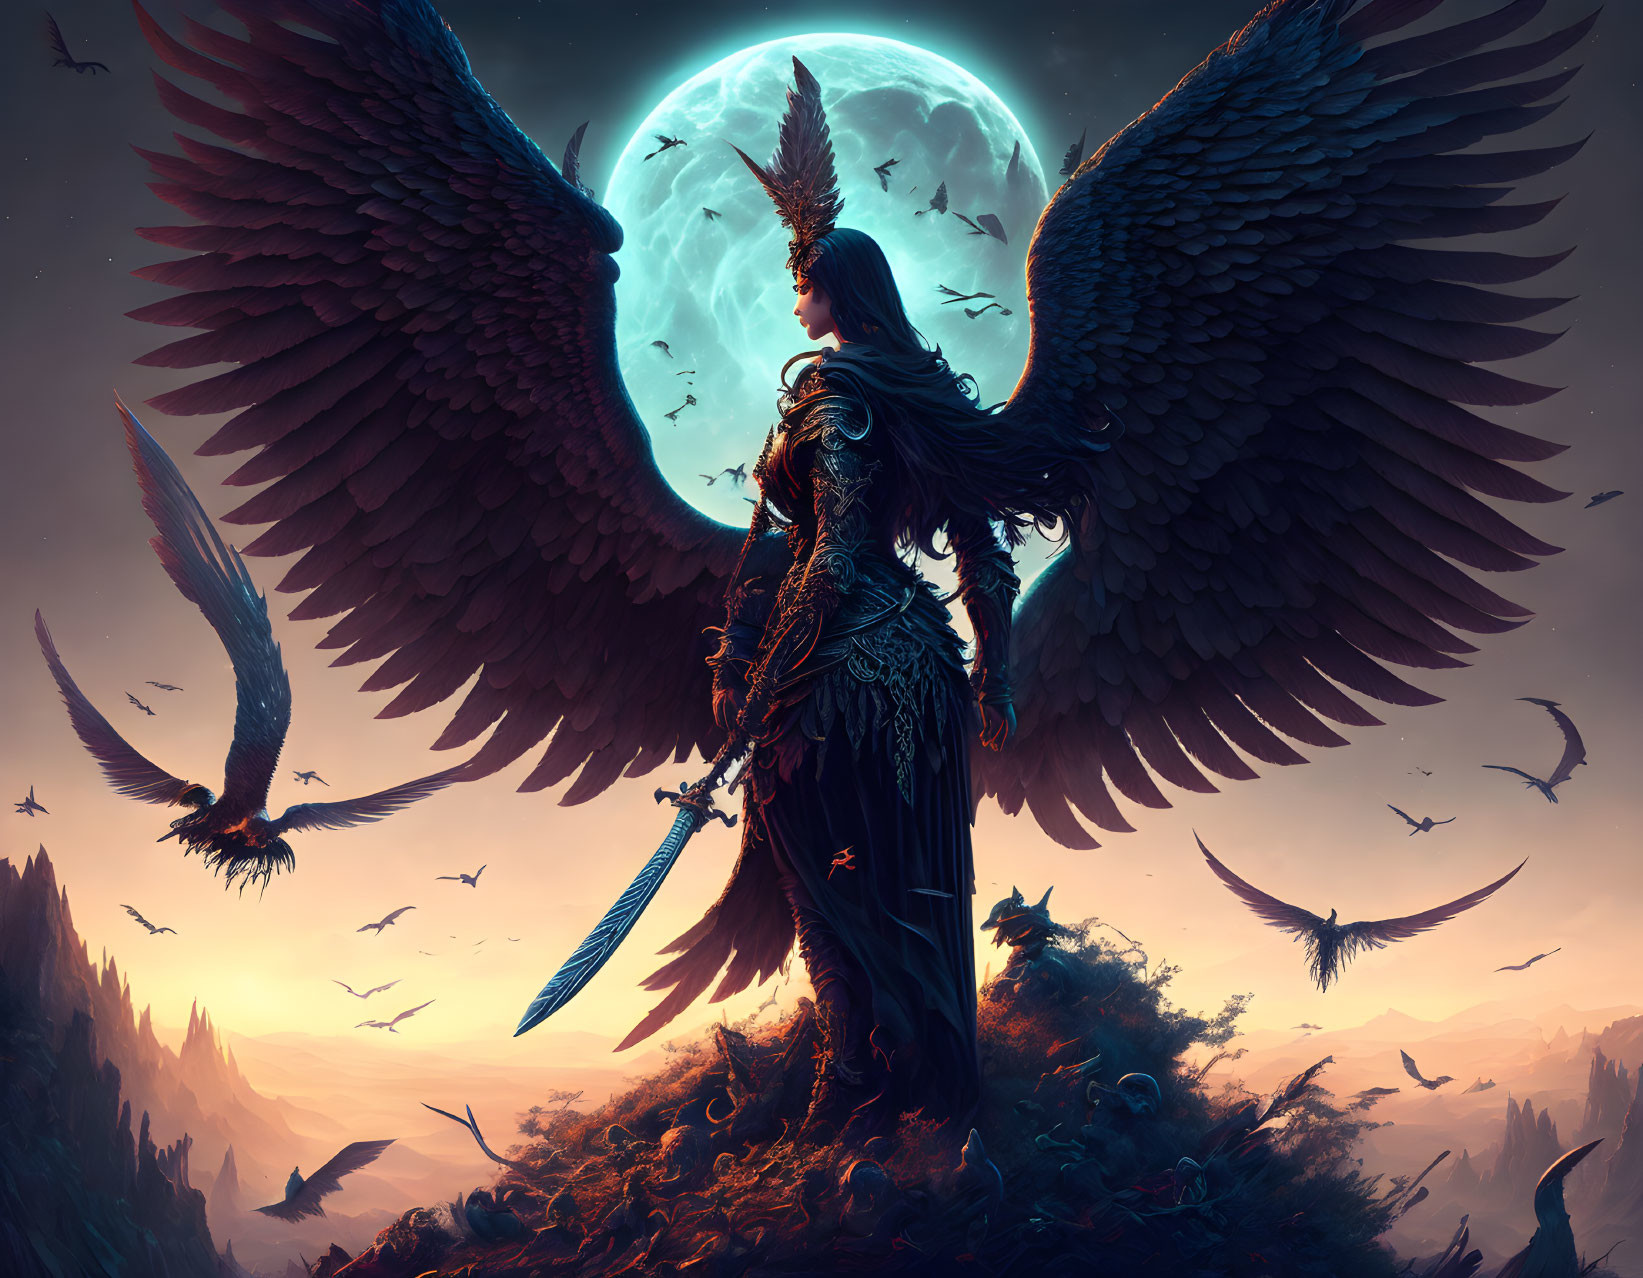 Winged fantasy warrior with sword under full moon